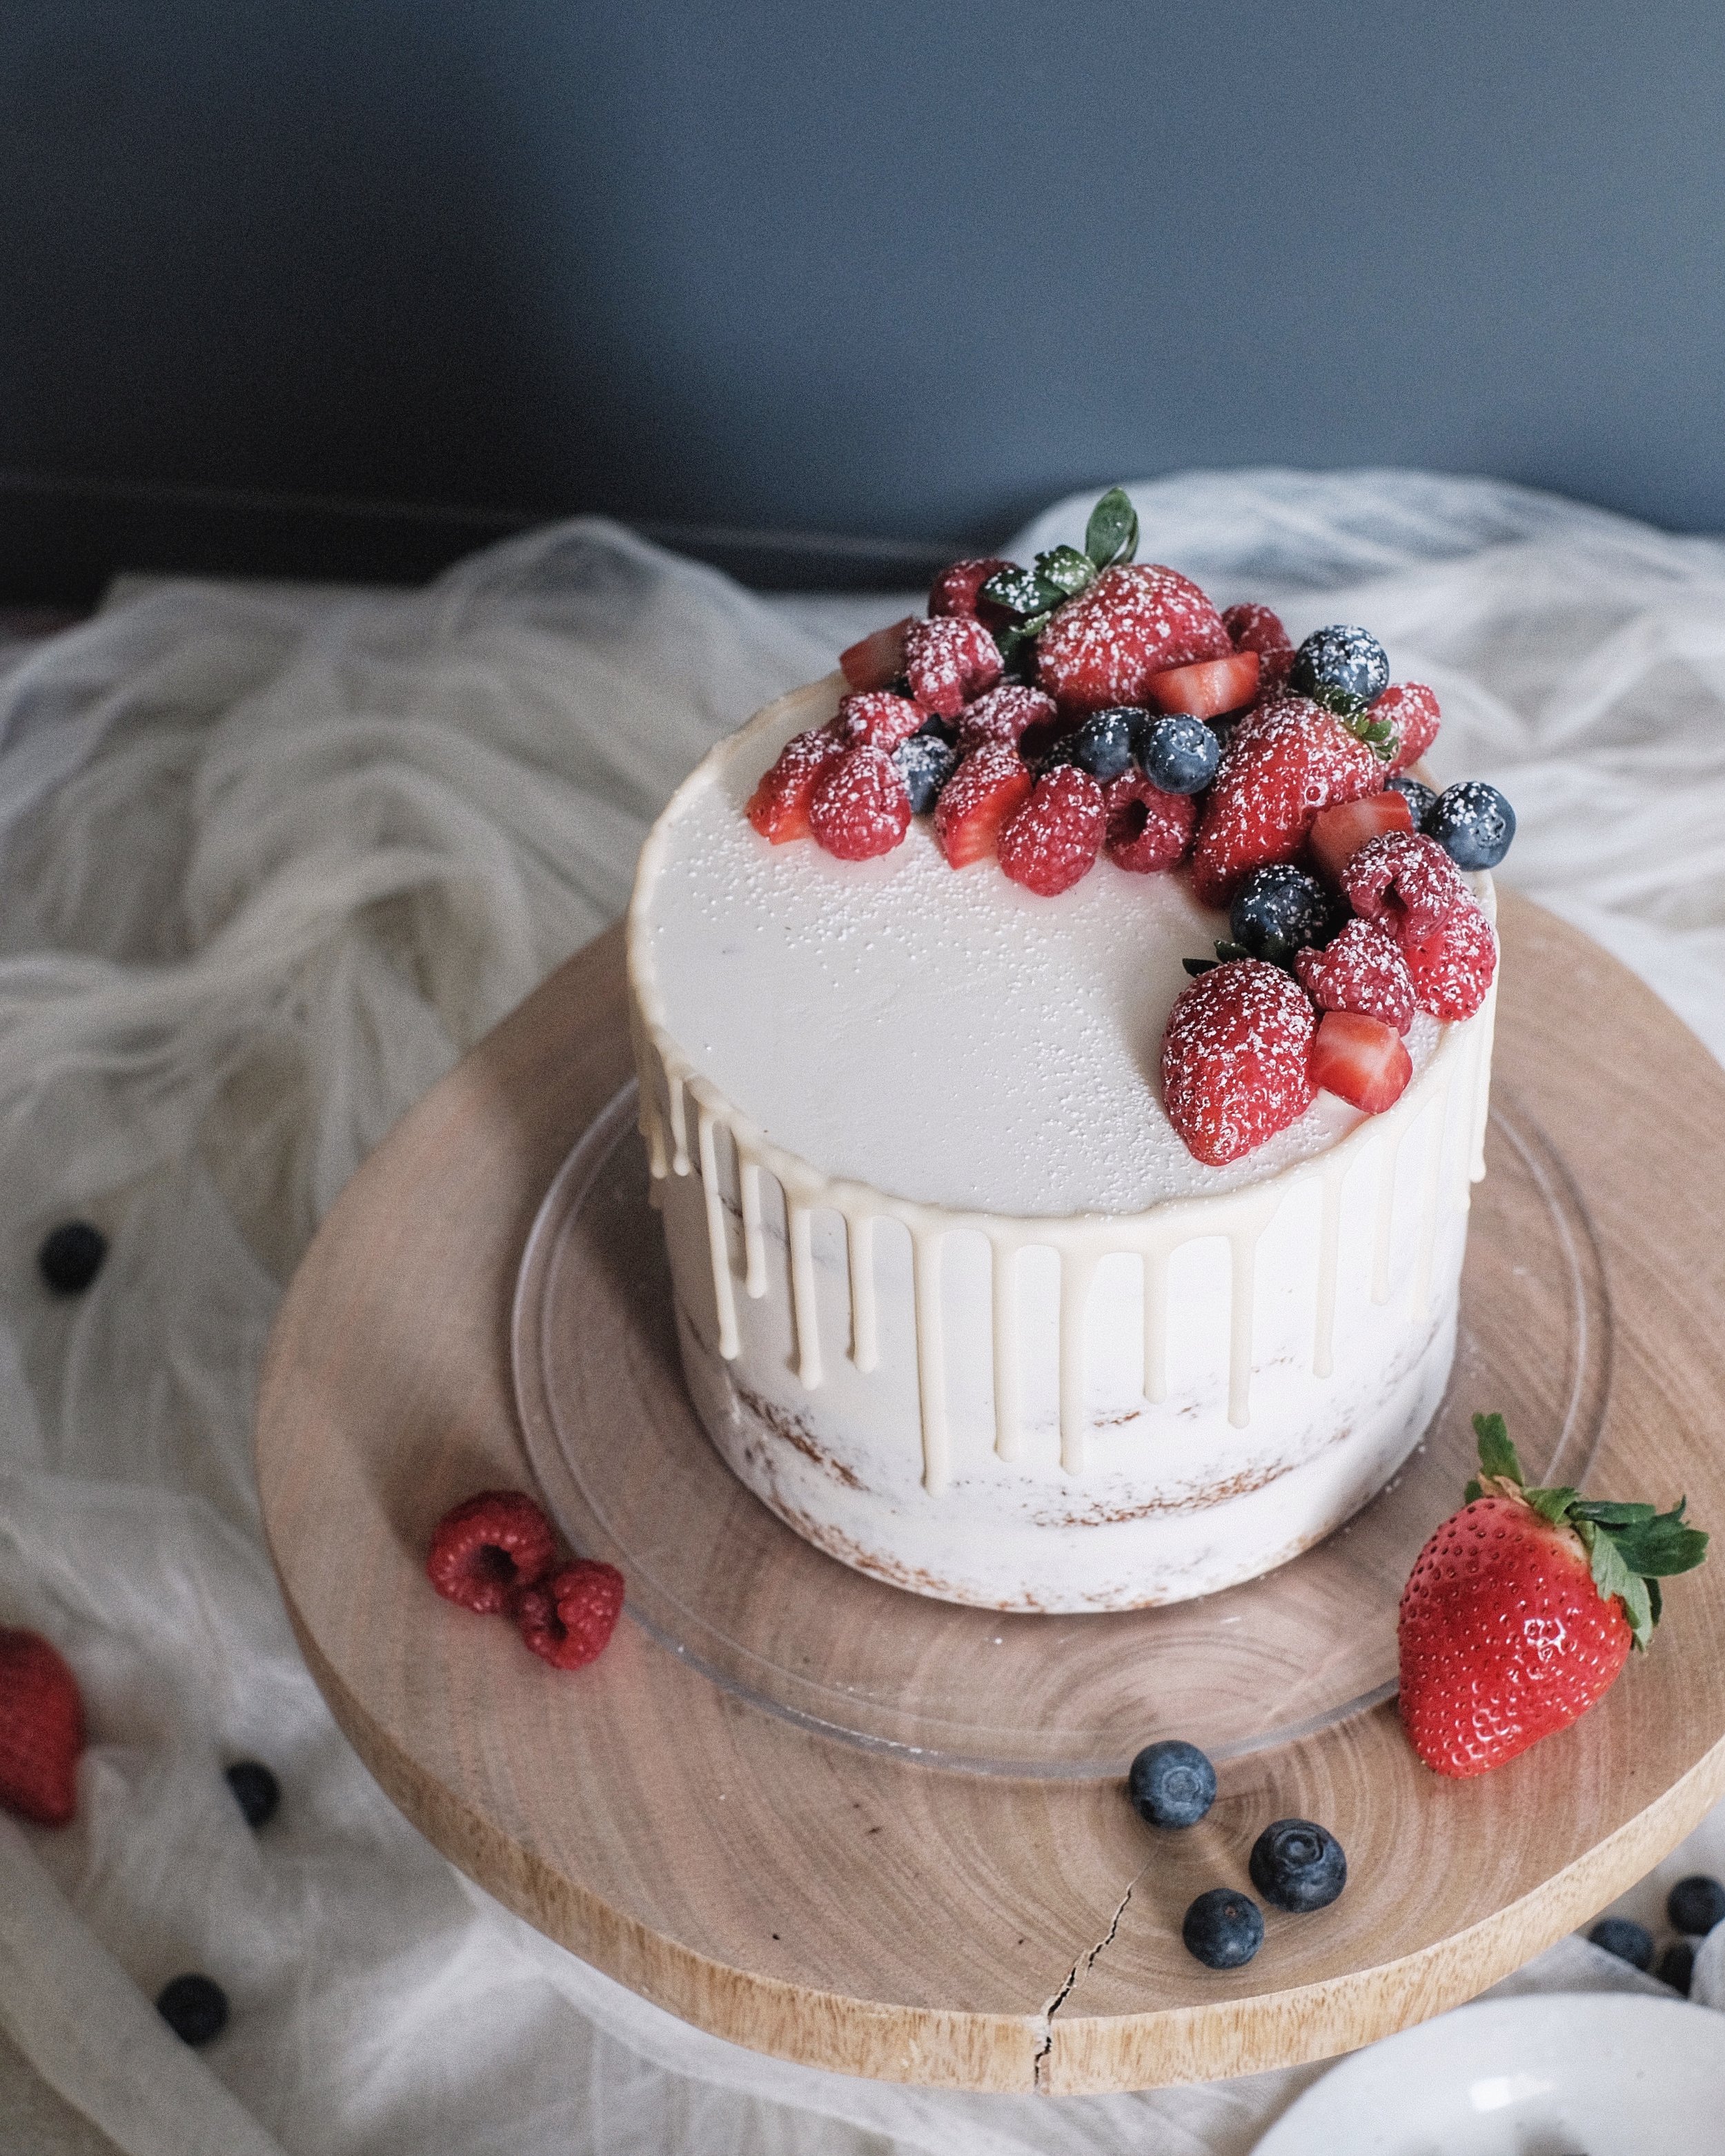 Semi-Naked Cake with Fruits class at Gusta Cooking Studio